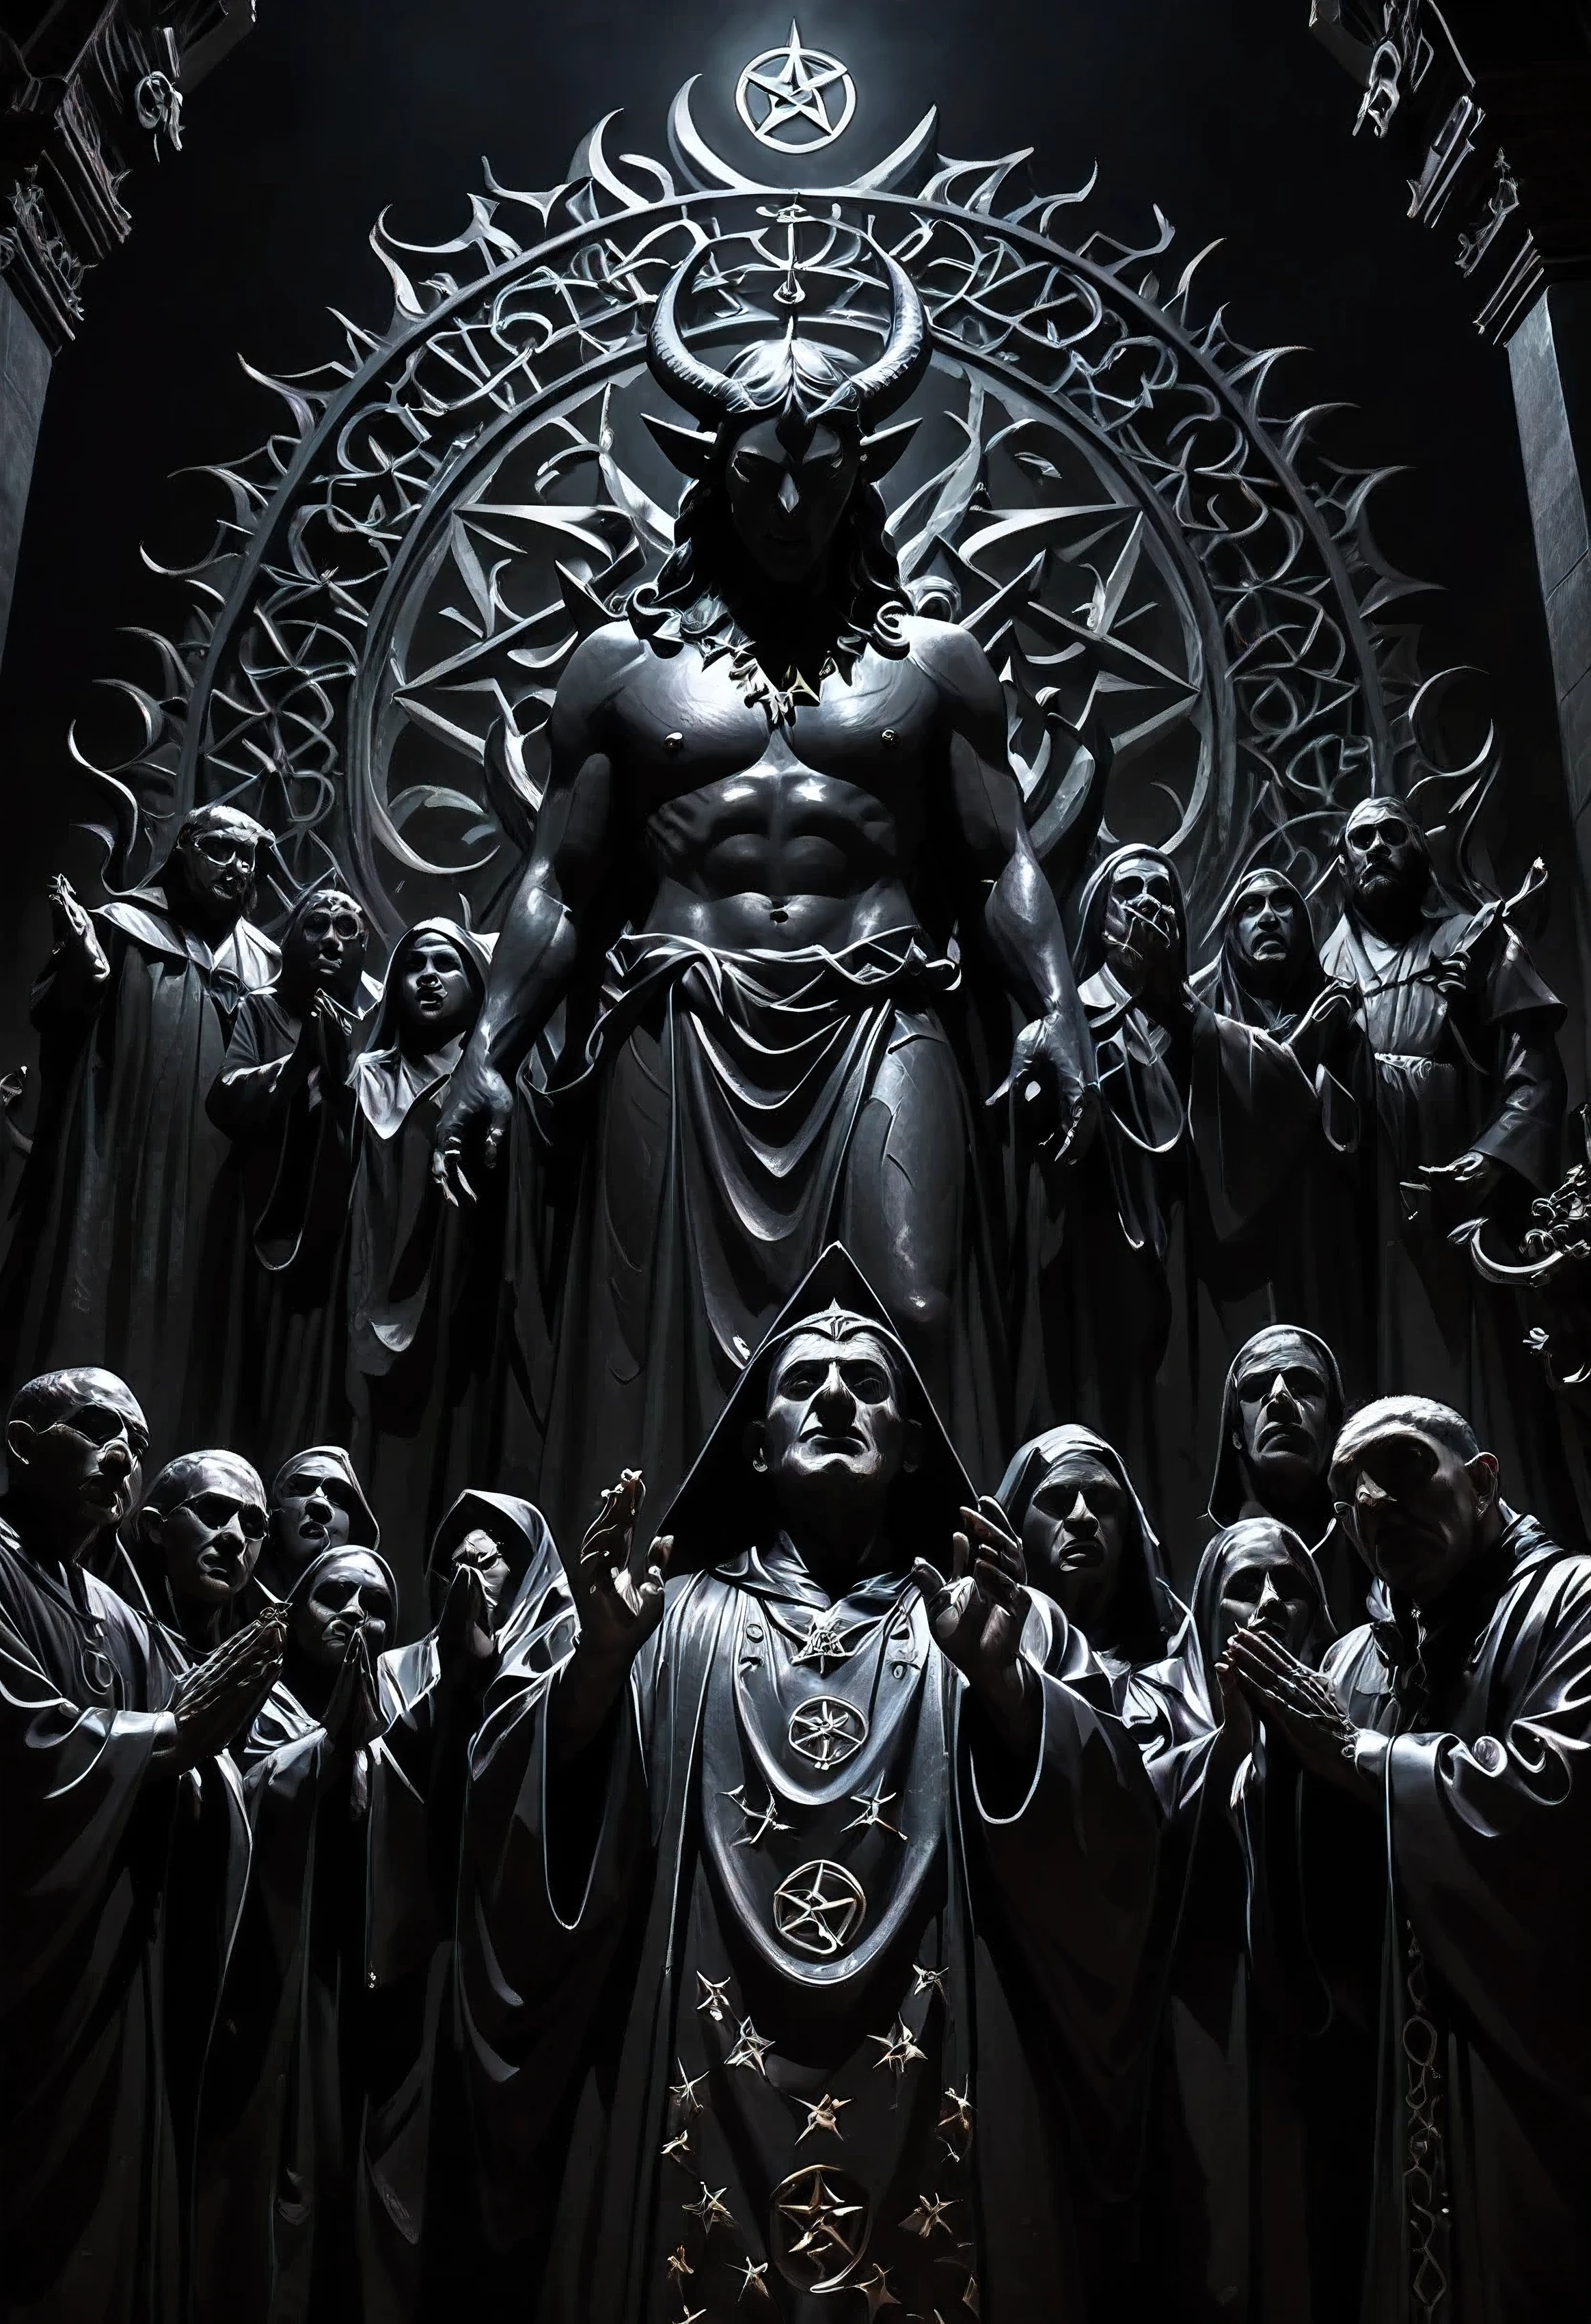 A satanic sect of twelve individuals, reunidos no ambiente mal iluminado e obscuro, pay homage to an imposing statue of Satan. the number, Bathed in darkness, looms over them with its intricately carved features, as the group bows their heads in prayer. Cada membro, dressed in robes of various shades of dark tones, revela seus rostos enquanto cantam frases antigas, the pentagram symbol displayed prominently between them, symbolizing his unwavering loyalty to the Dark Lord. Your worship, shrouded in secrecy and mystery, se desenrola neste quadro arrepiante, a testament to your devotion and commitment.